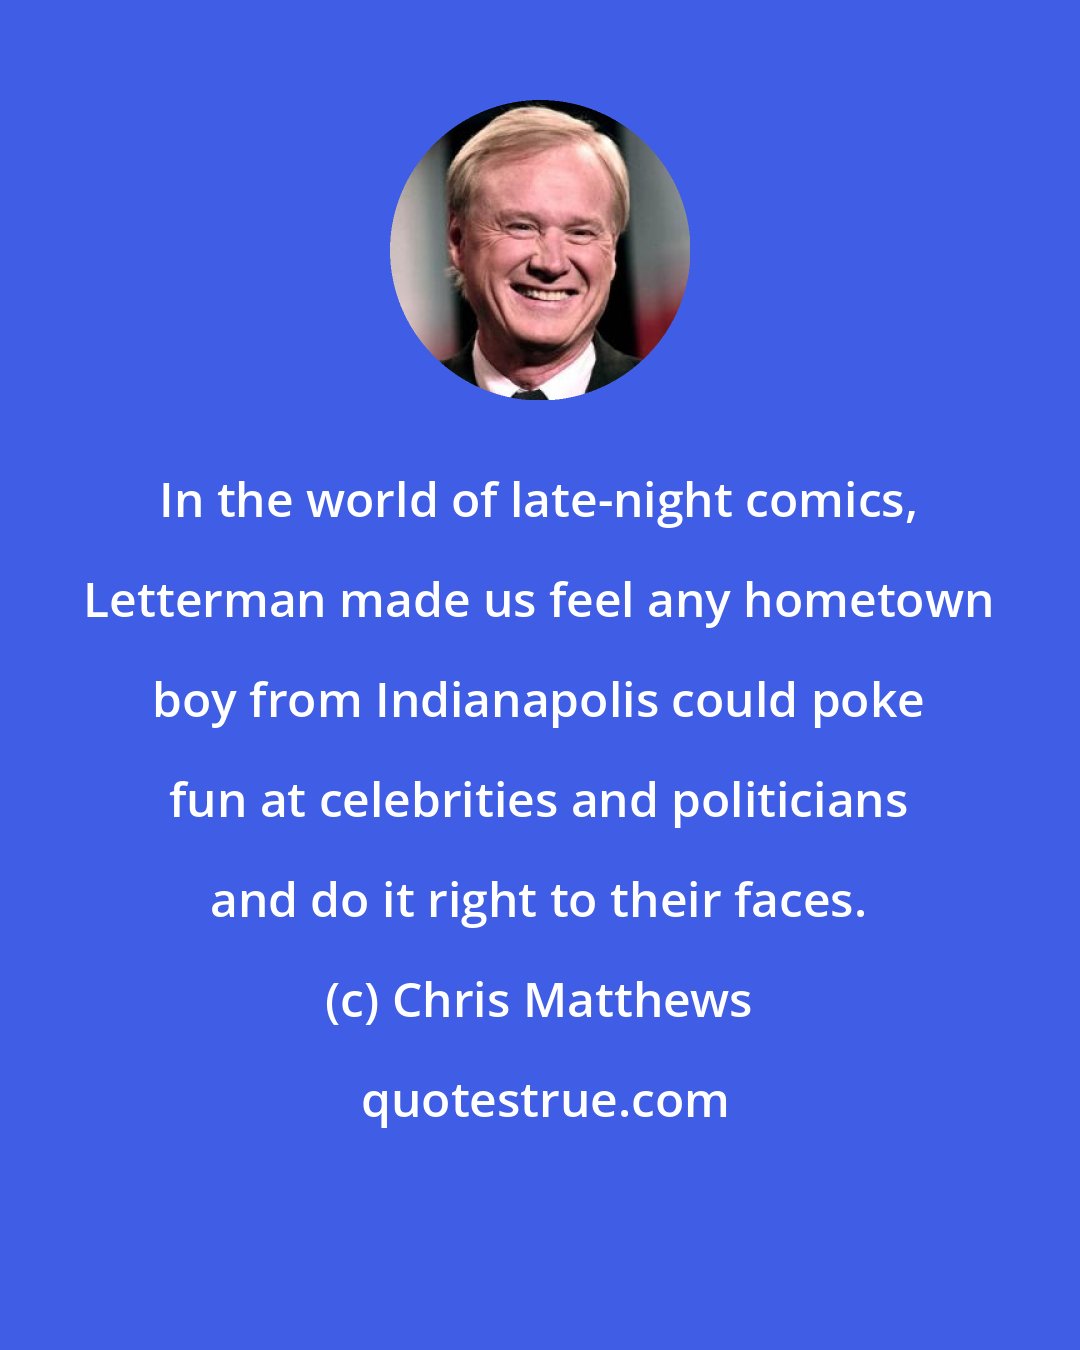 Chris Matthews: In the world of late-night comics, Letterman made us feel any hometown boy from Indianapolis could poke fun at celebrities and politicians and do it right to their faces.